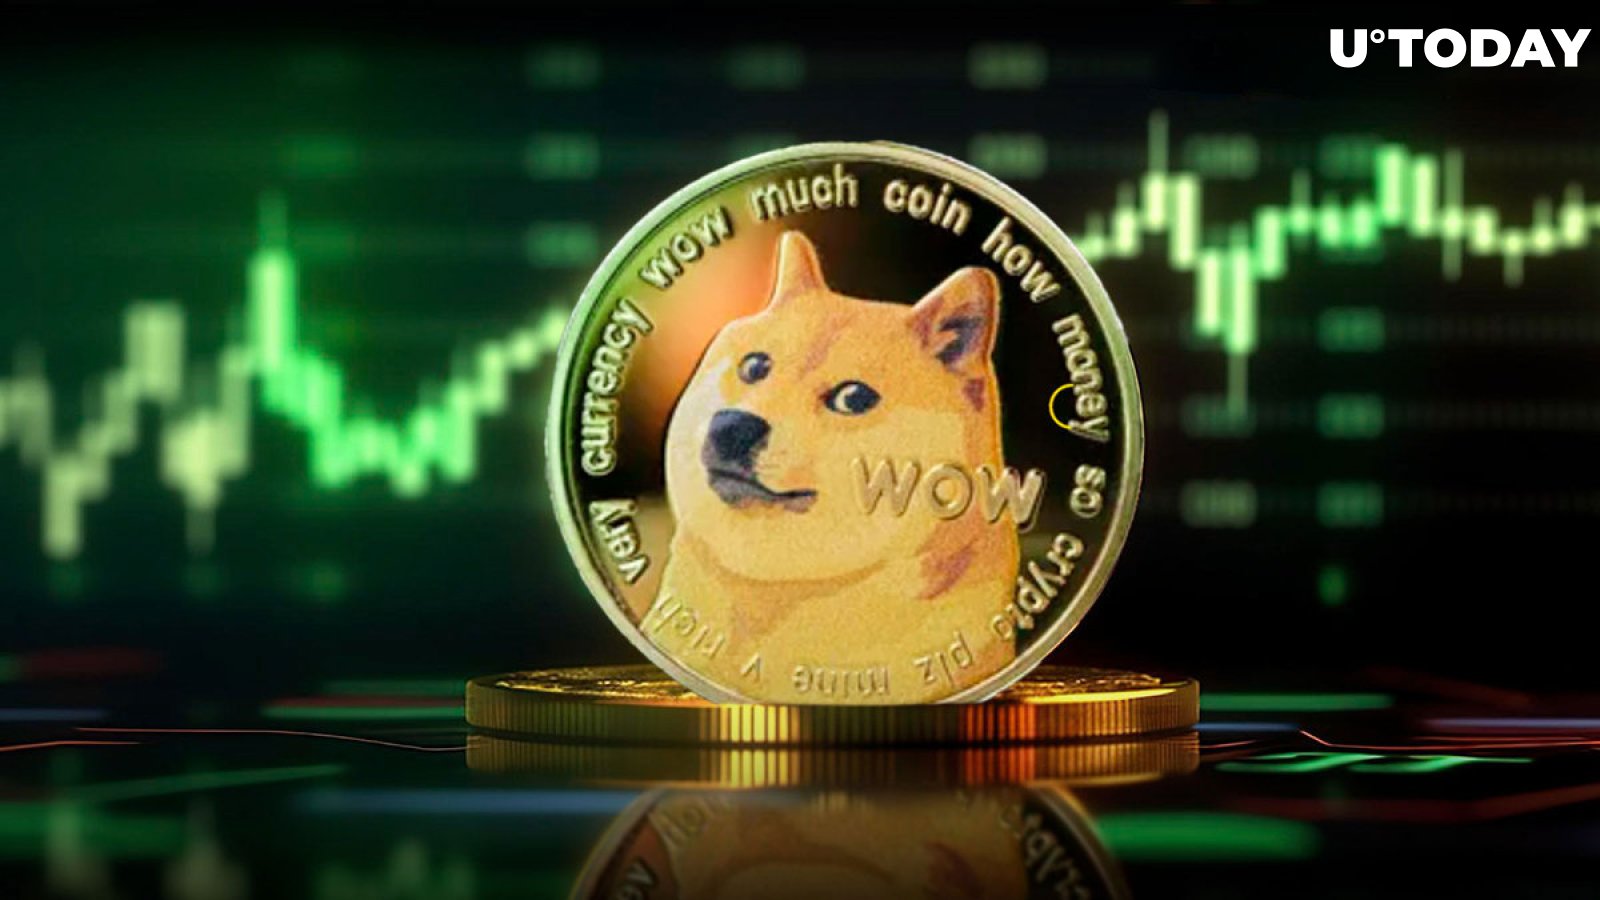 Dogecoin (DOGE) Price May Double After Breaking Through This Hurdle: Analyst